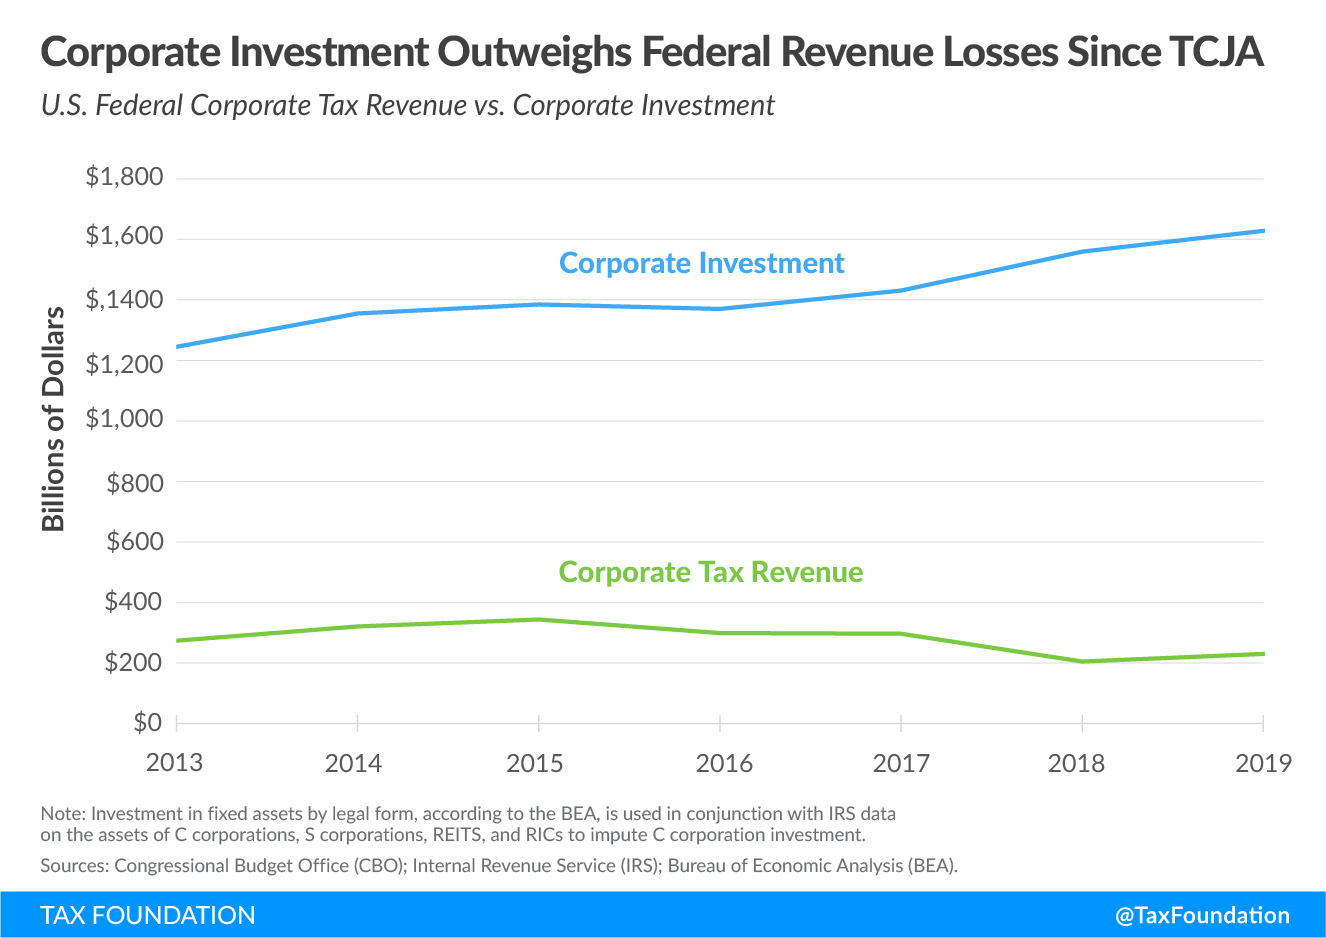 Tax Cuts and Jobs Act corporate investment and Tax Cuts and Jobs Act revenue loss data. Learn more about TCJA corporate revenues and TCJA corporate investments